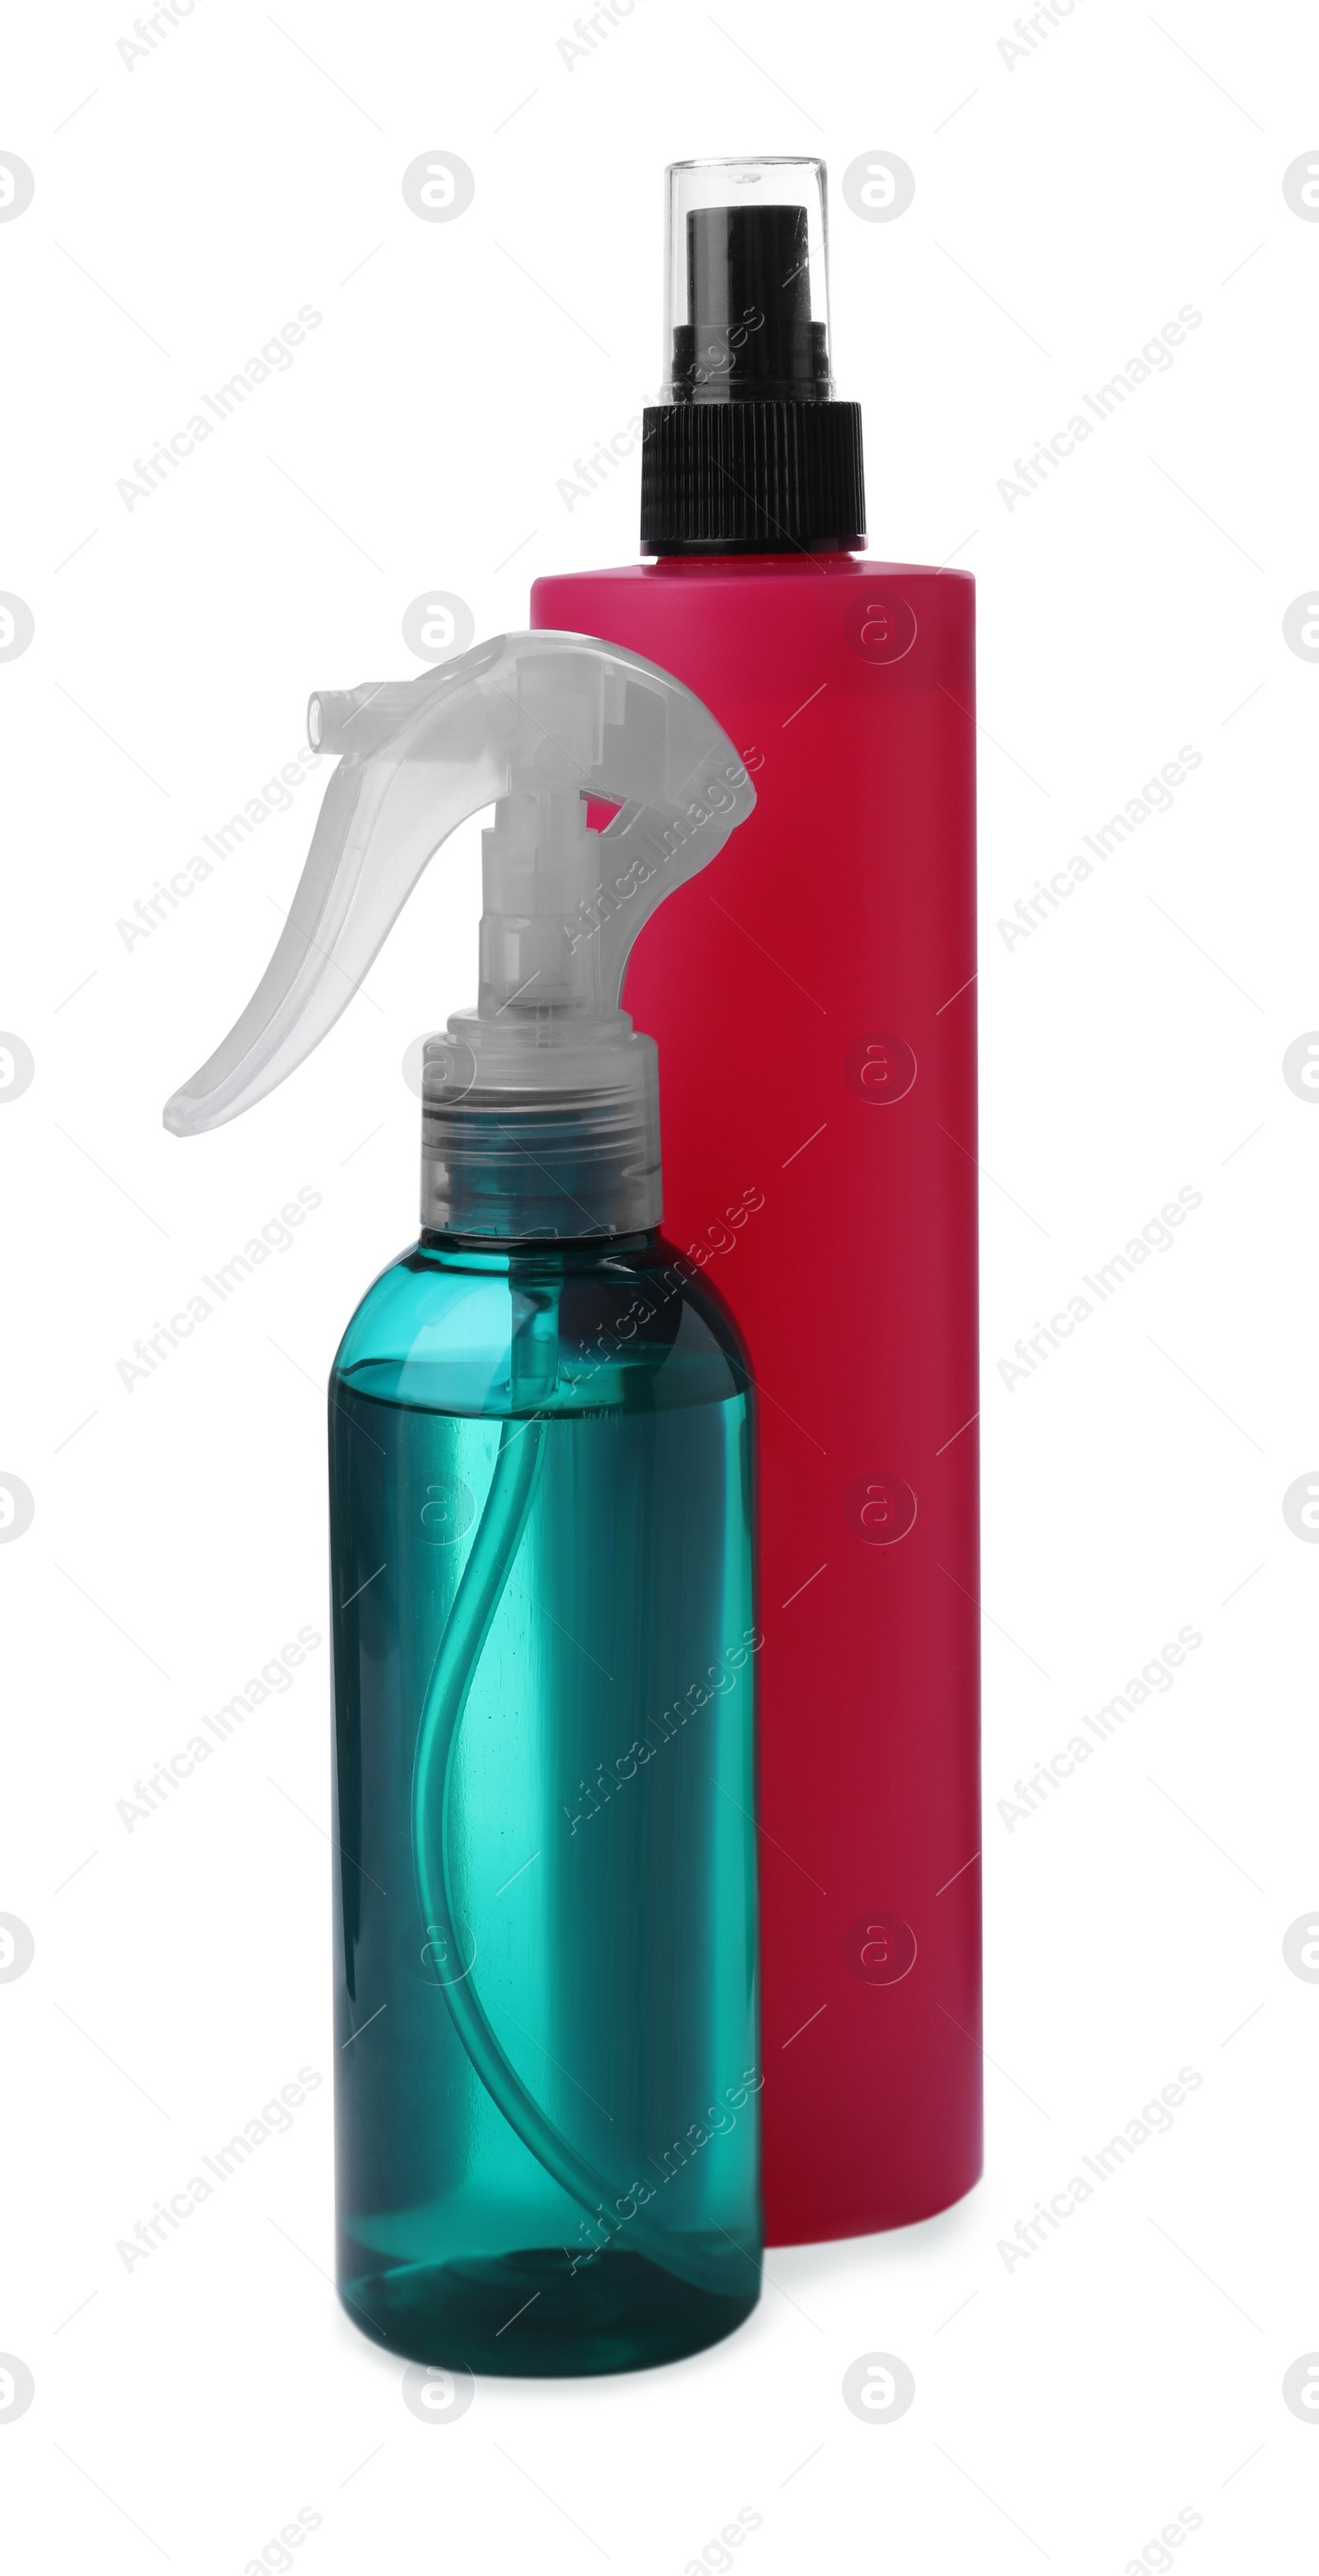 Photo of Spray bottles with hair thermal protection isolated on white